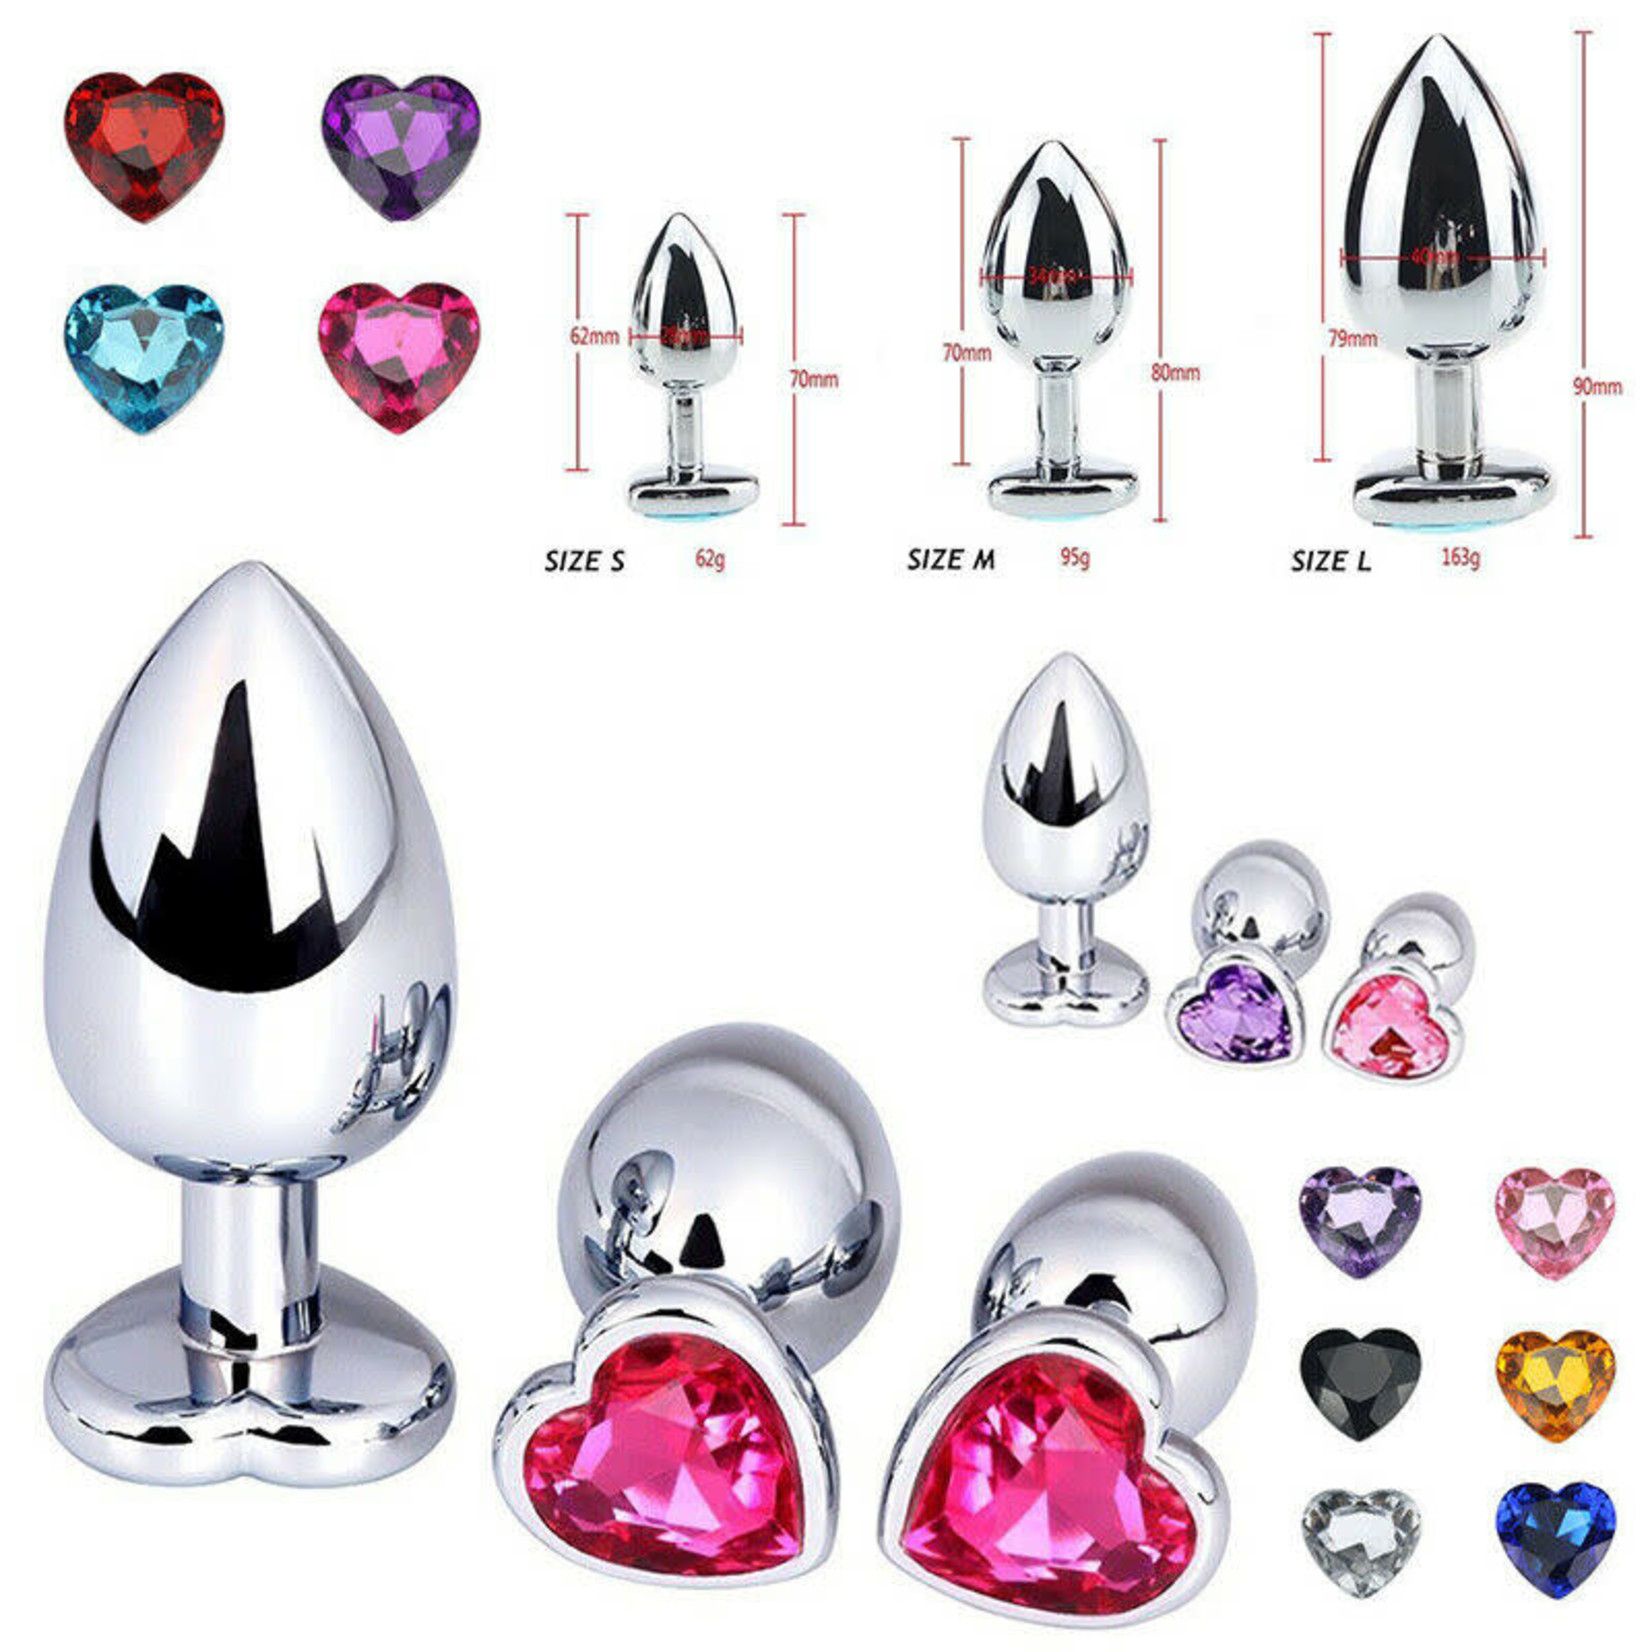 STAINLESS STEEL HEART BUTT PLUG - LARGE